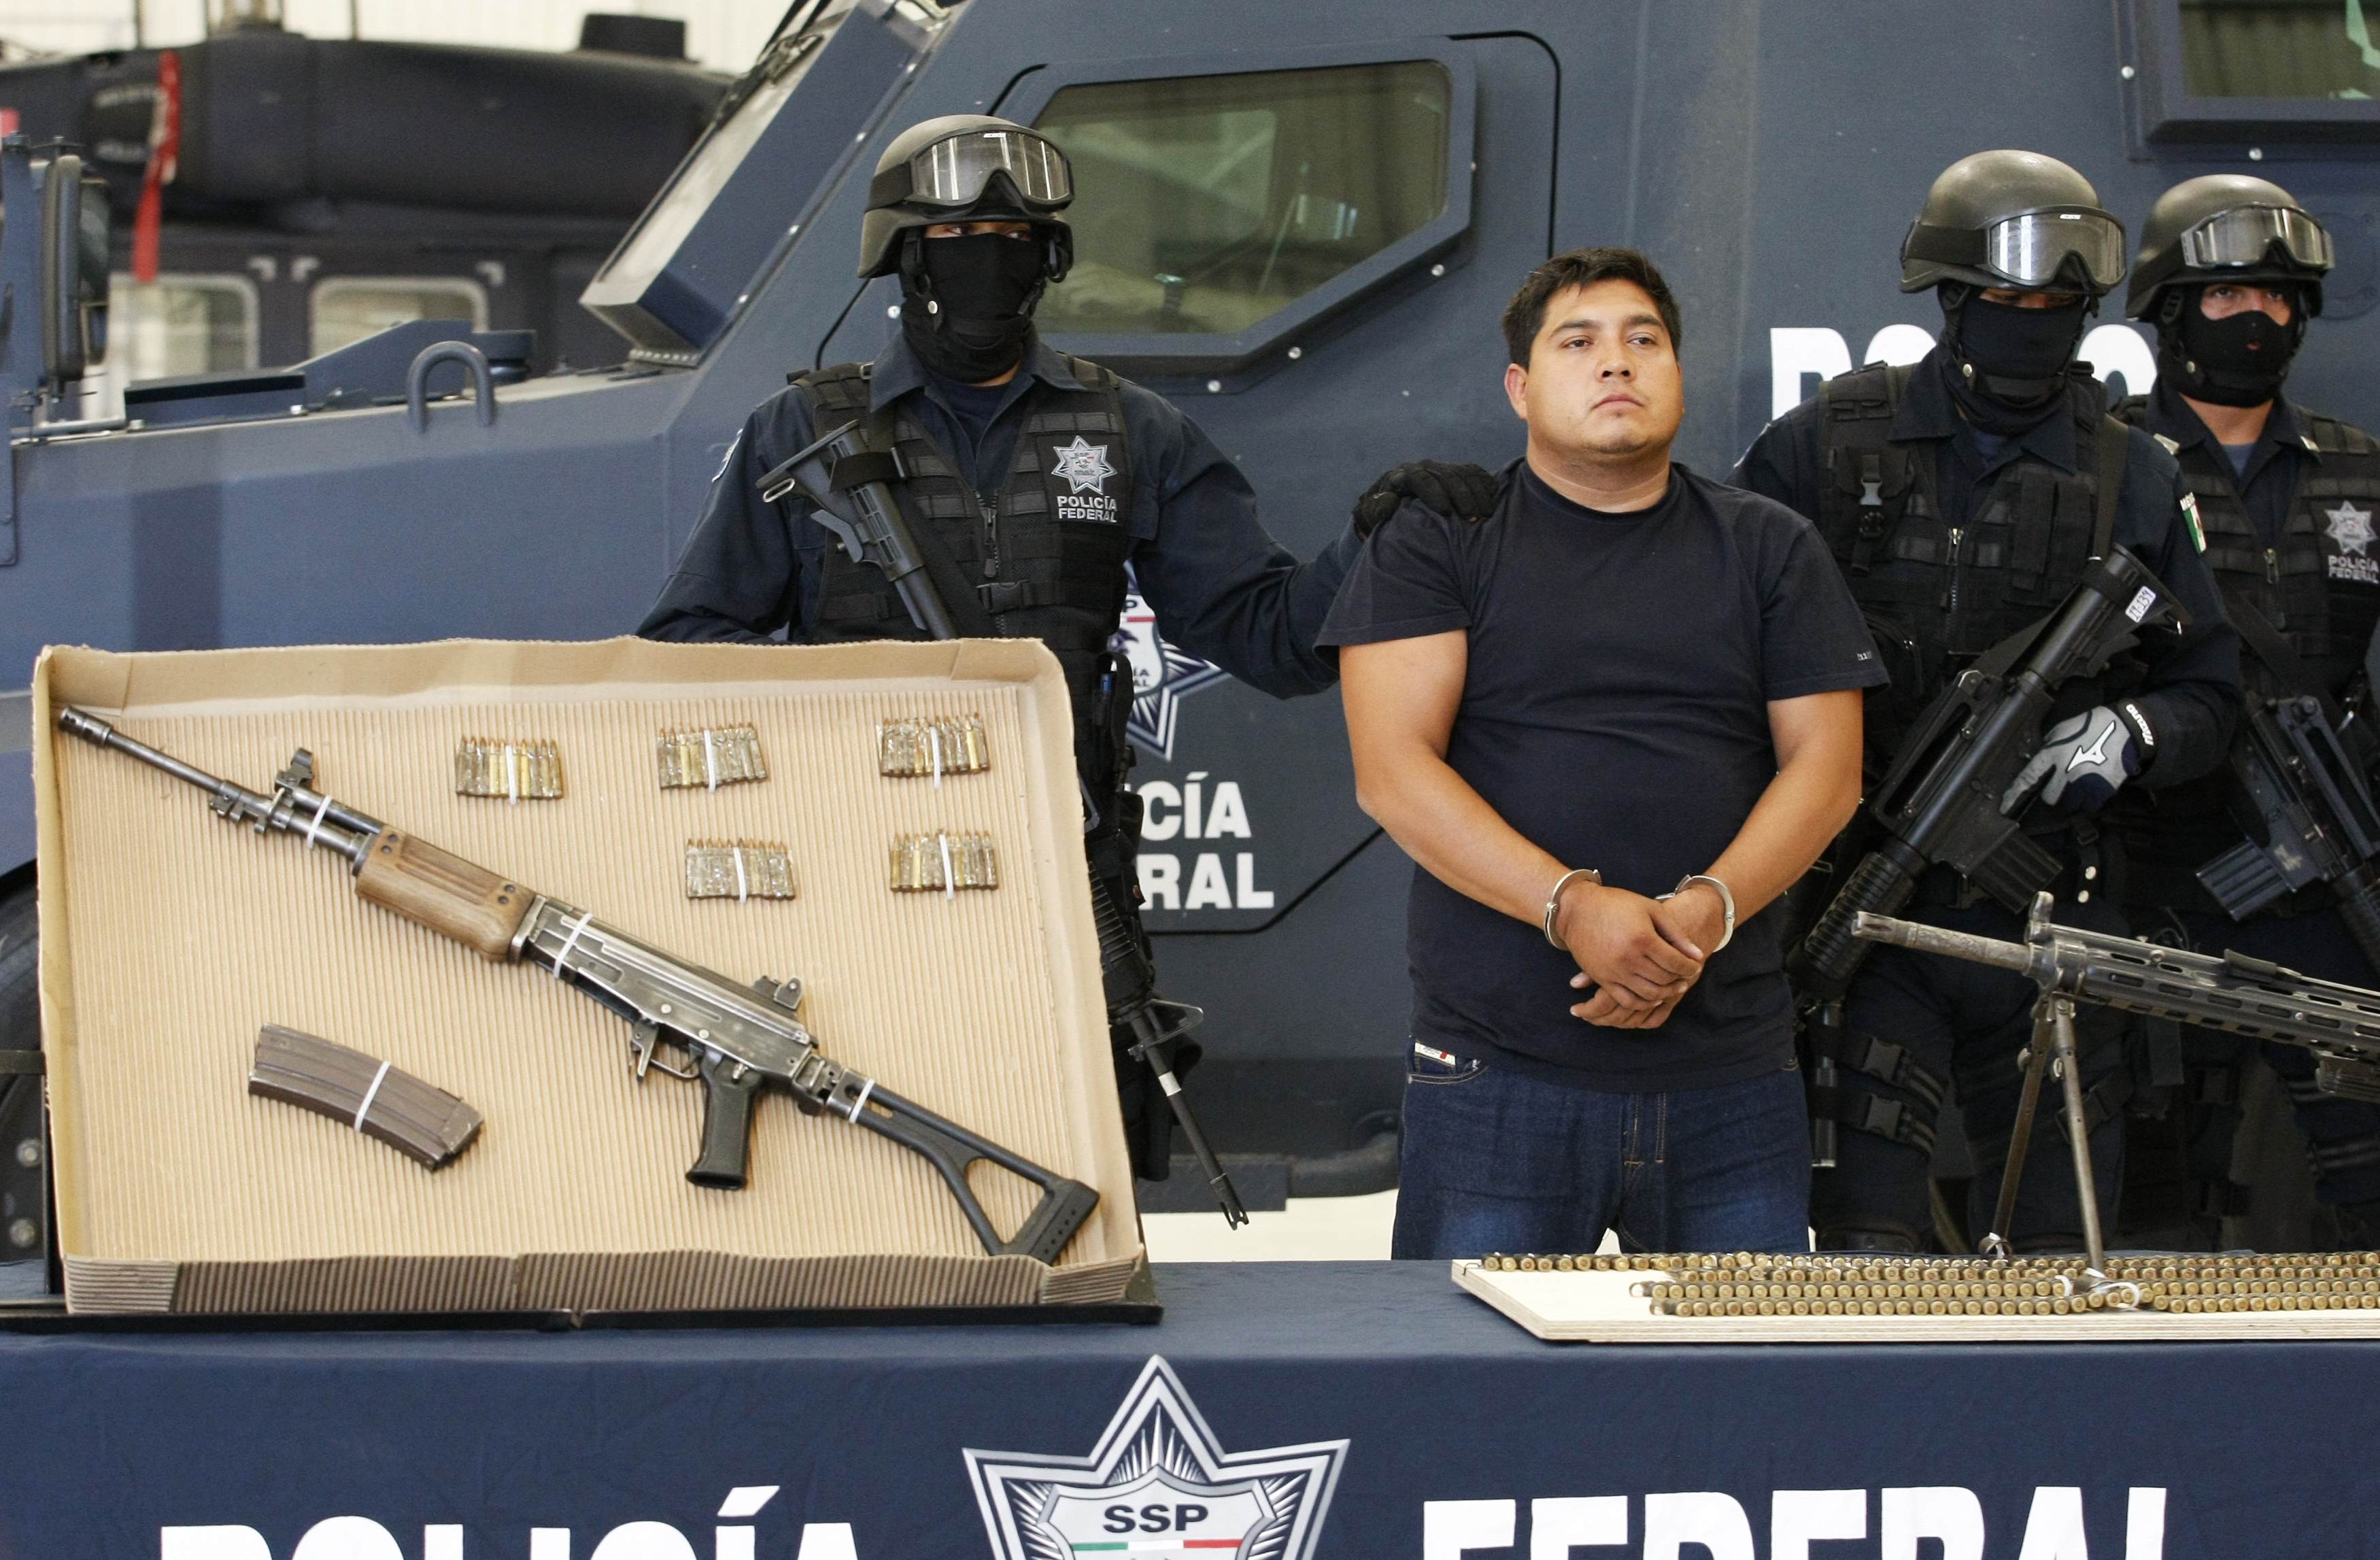 Eliot Alberto Radillo Peza (C), also known as "El Pancho", is suspected to be an operative leader of the Jalisco New Generation cartel, according to Mexican authorities. Photo: Reuters